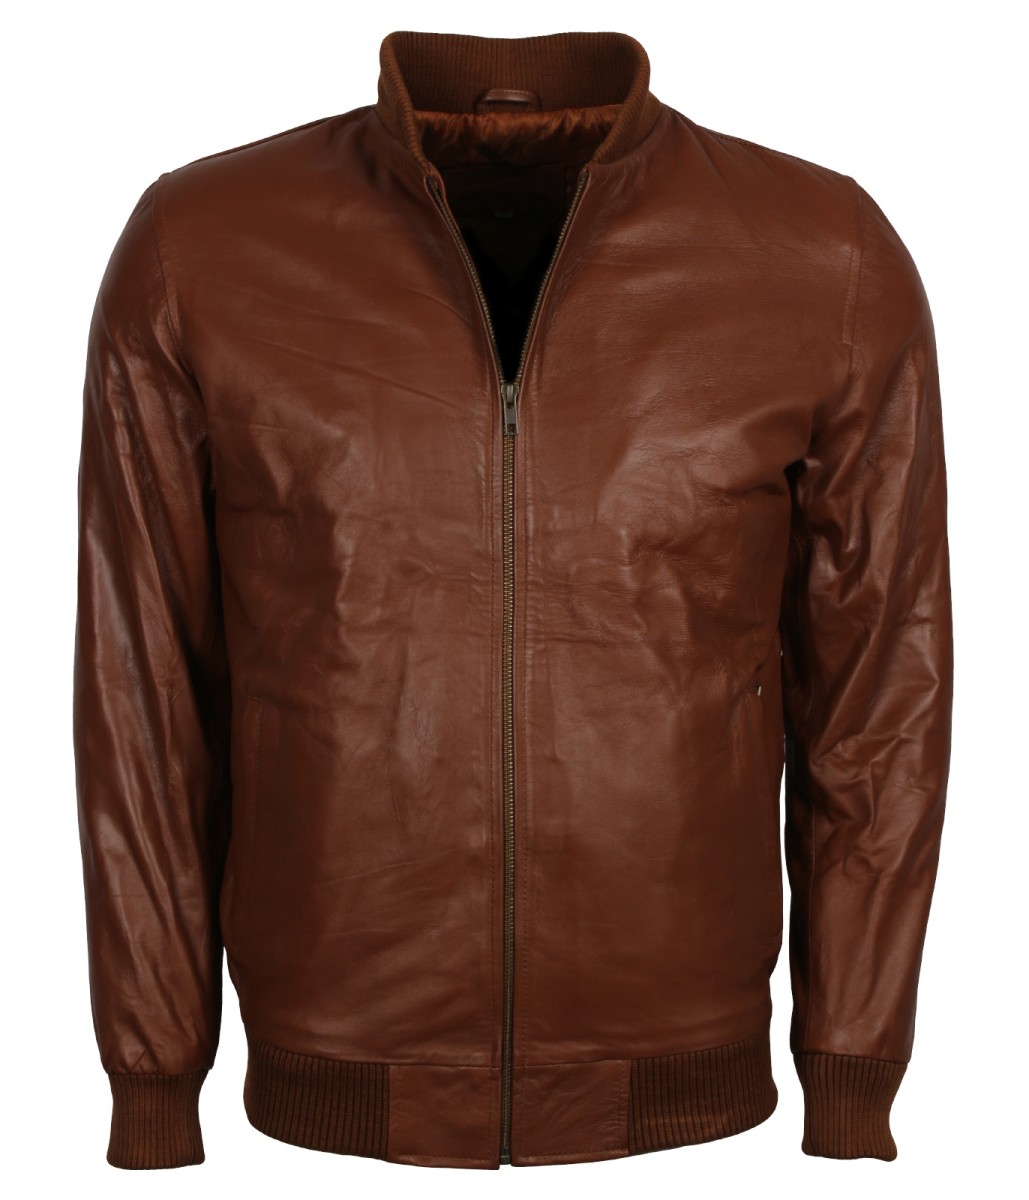 Men's Brown Fashion Ribbed Leather Jacket - Stinson Leathers